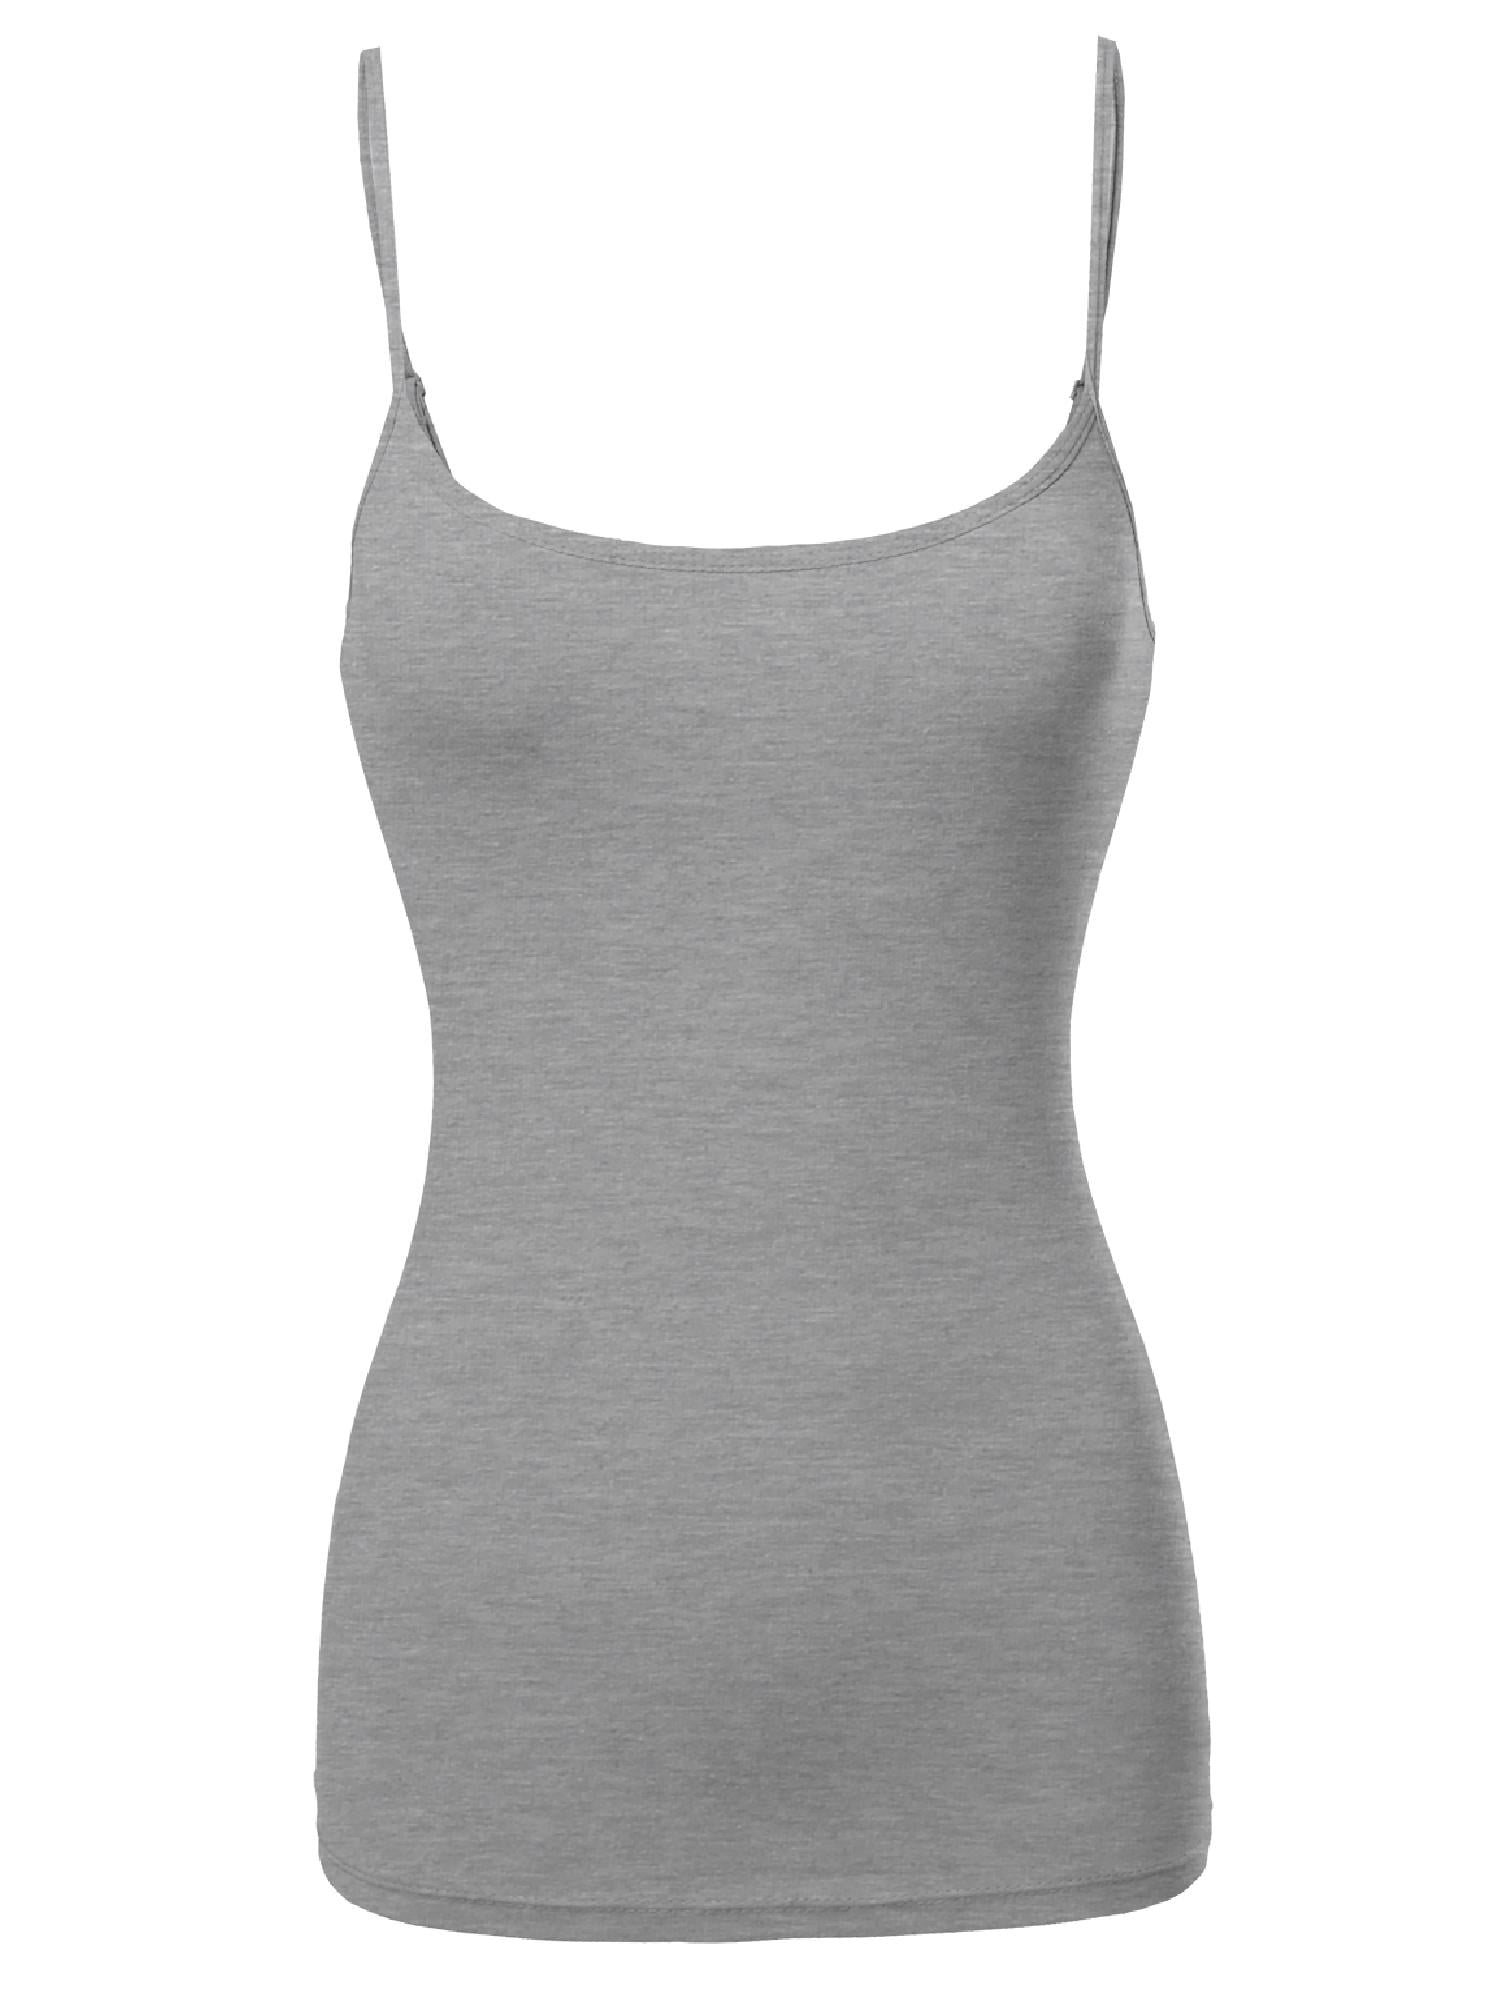 Sofra Women's Tank Top Cotton Ribbed 2 Pack Deal(H Grey/H Grey-L